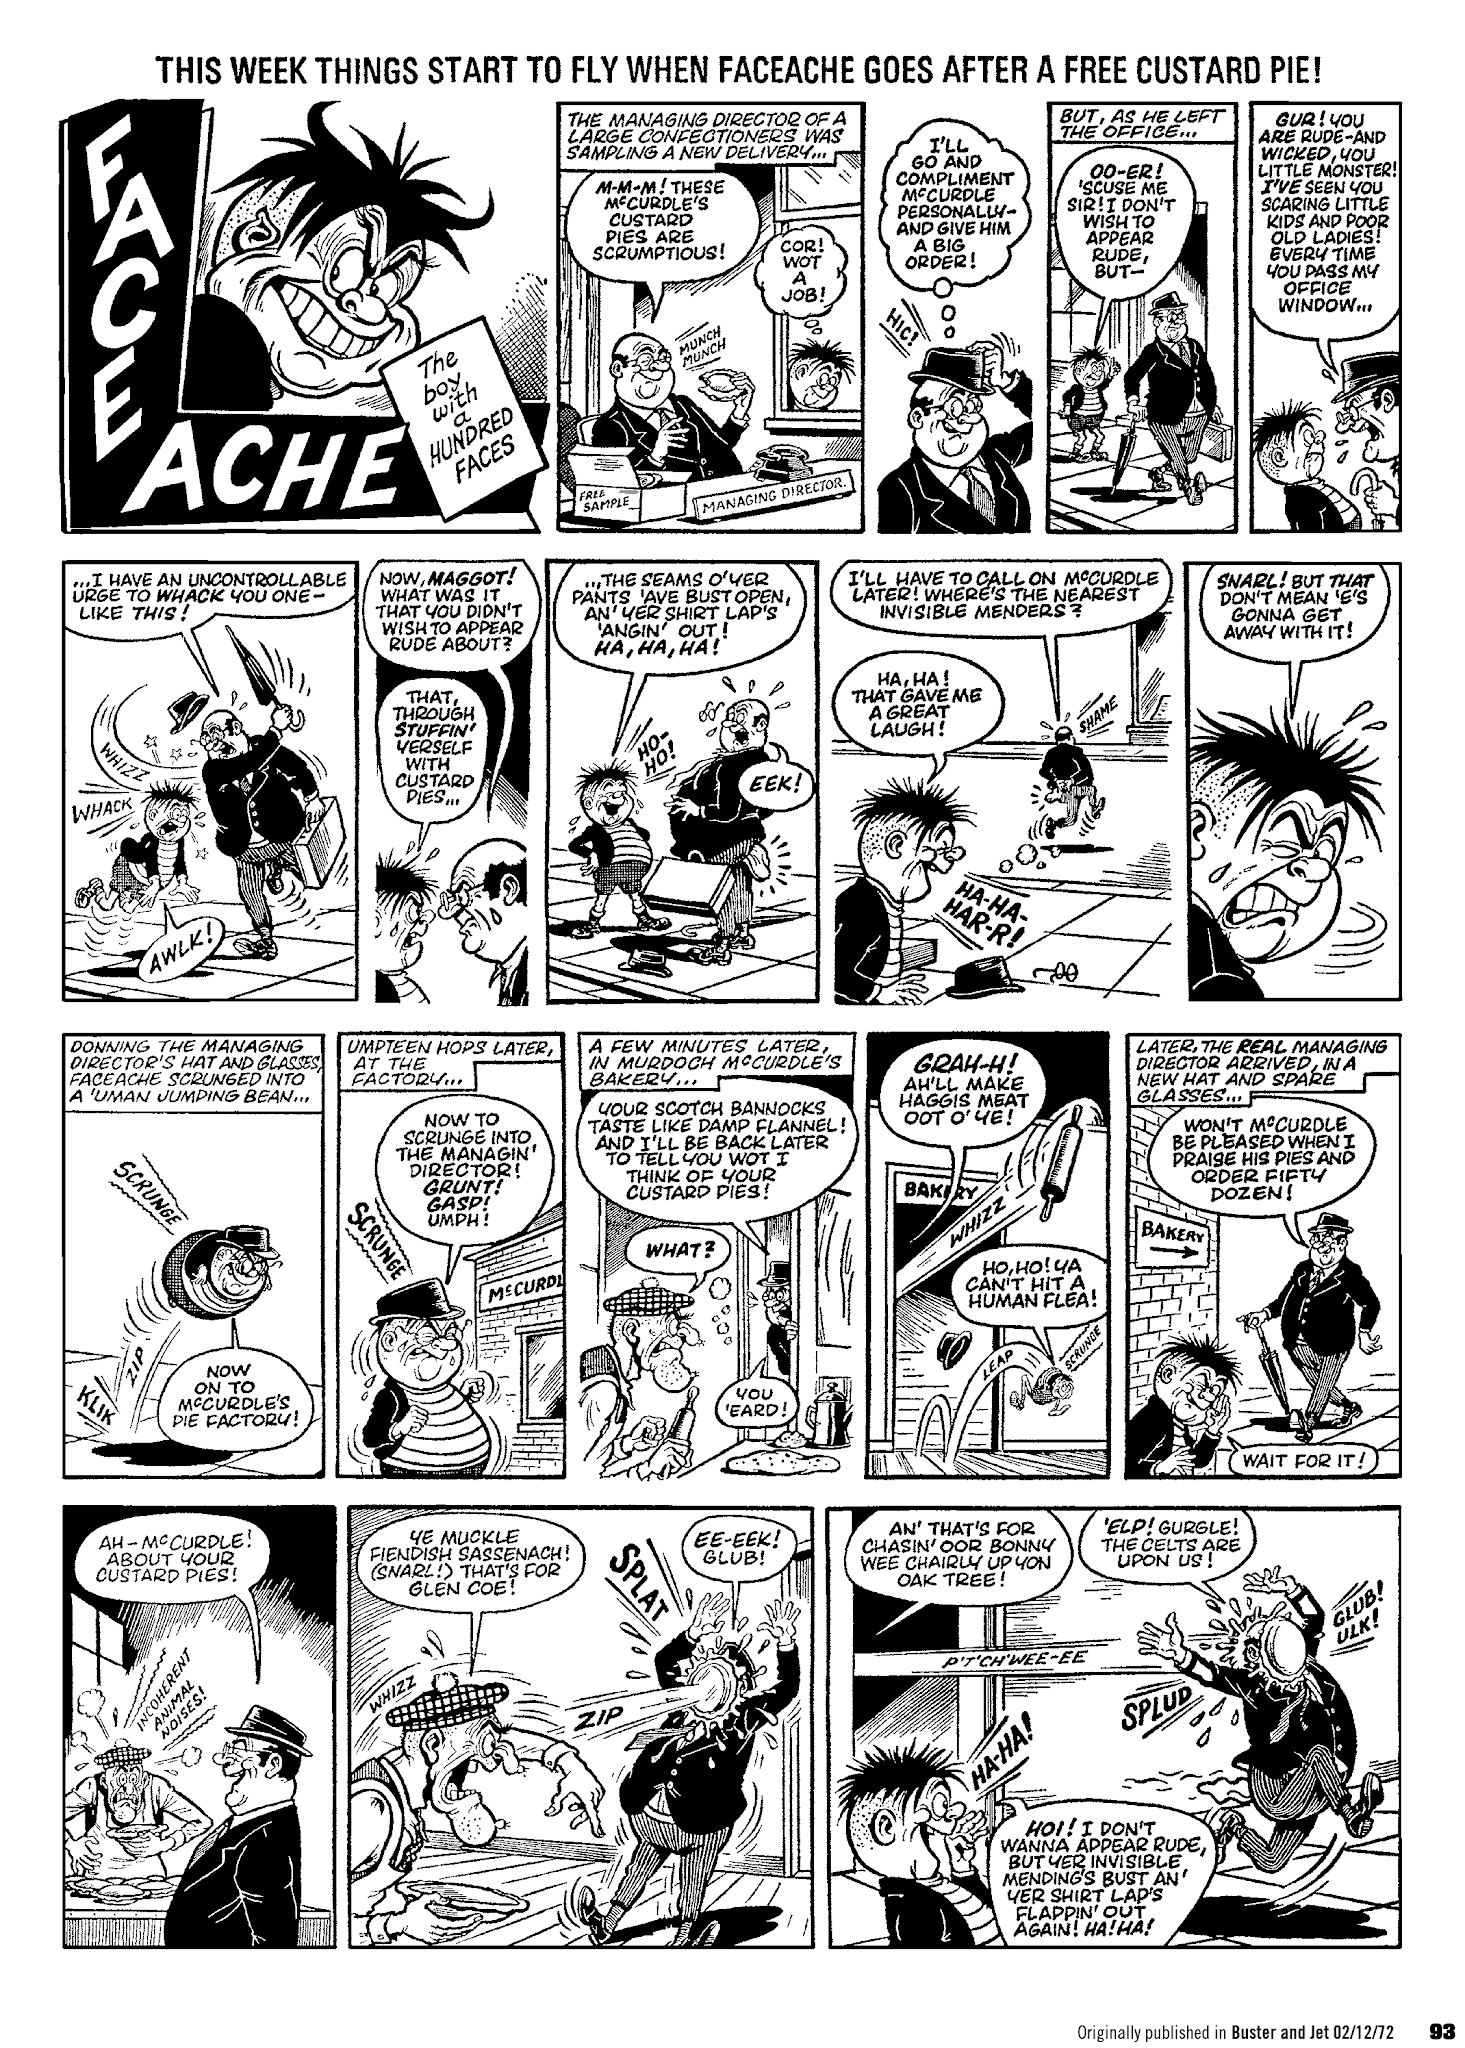 Read online Faceache: The First Hundred Scrunges comic -  Issue # TPB 1 - 95